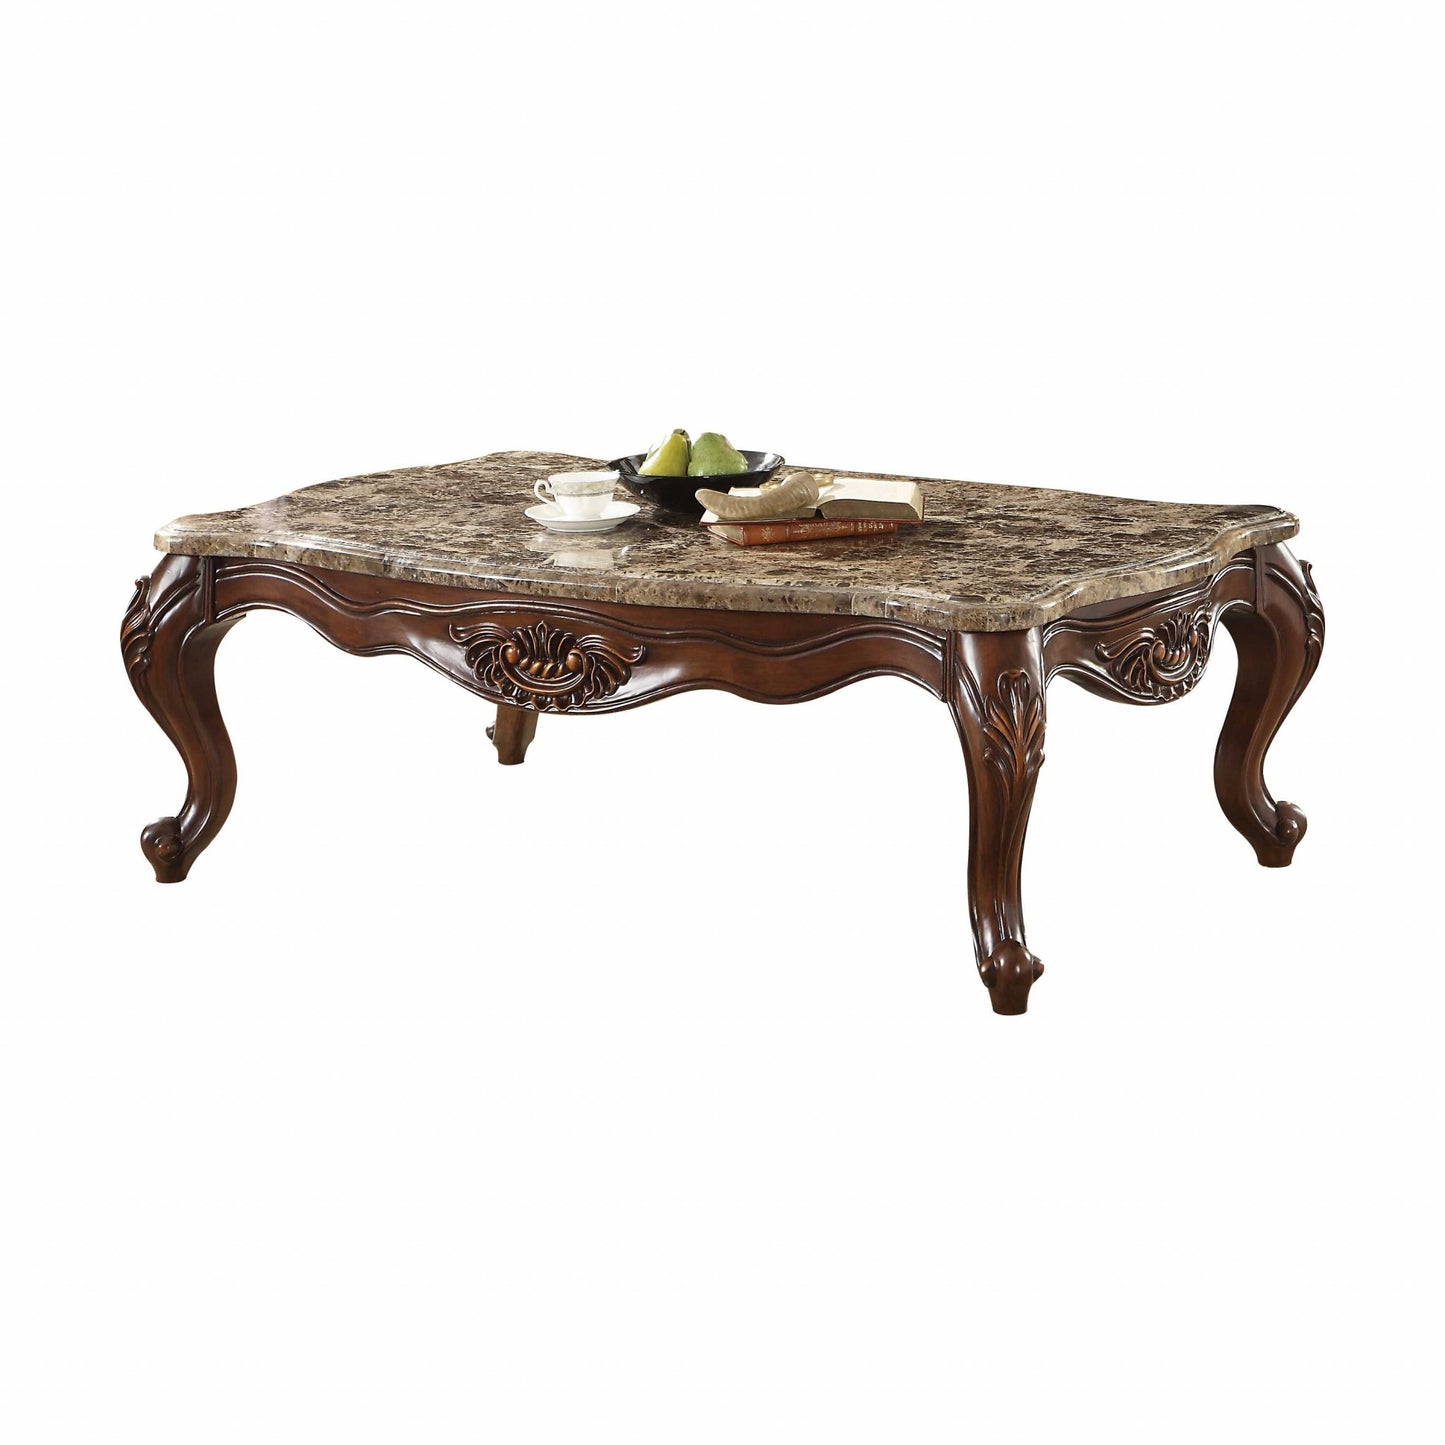 35" X 57" X 20" Marble Champagne Wood Coffee Table